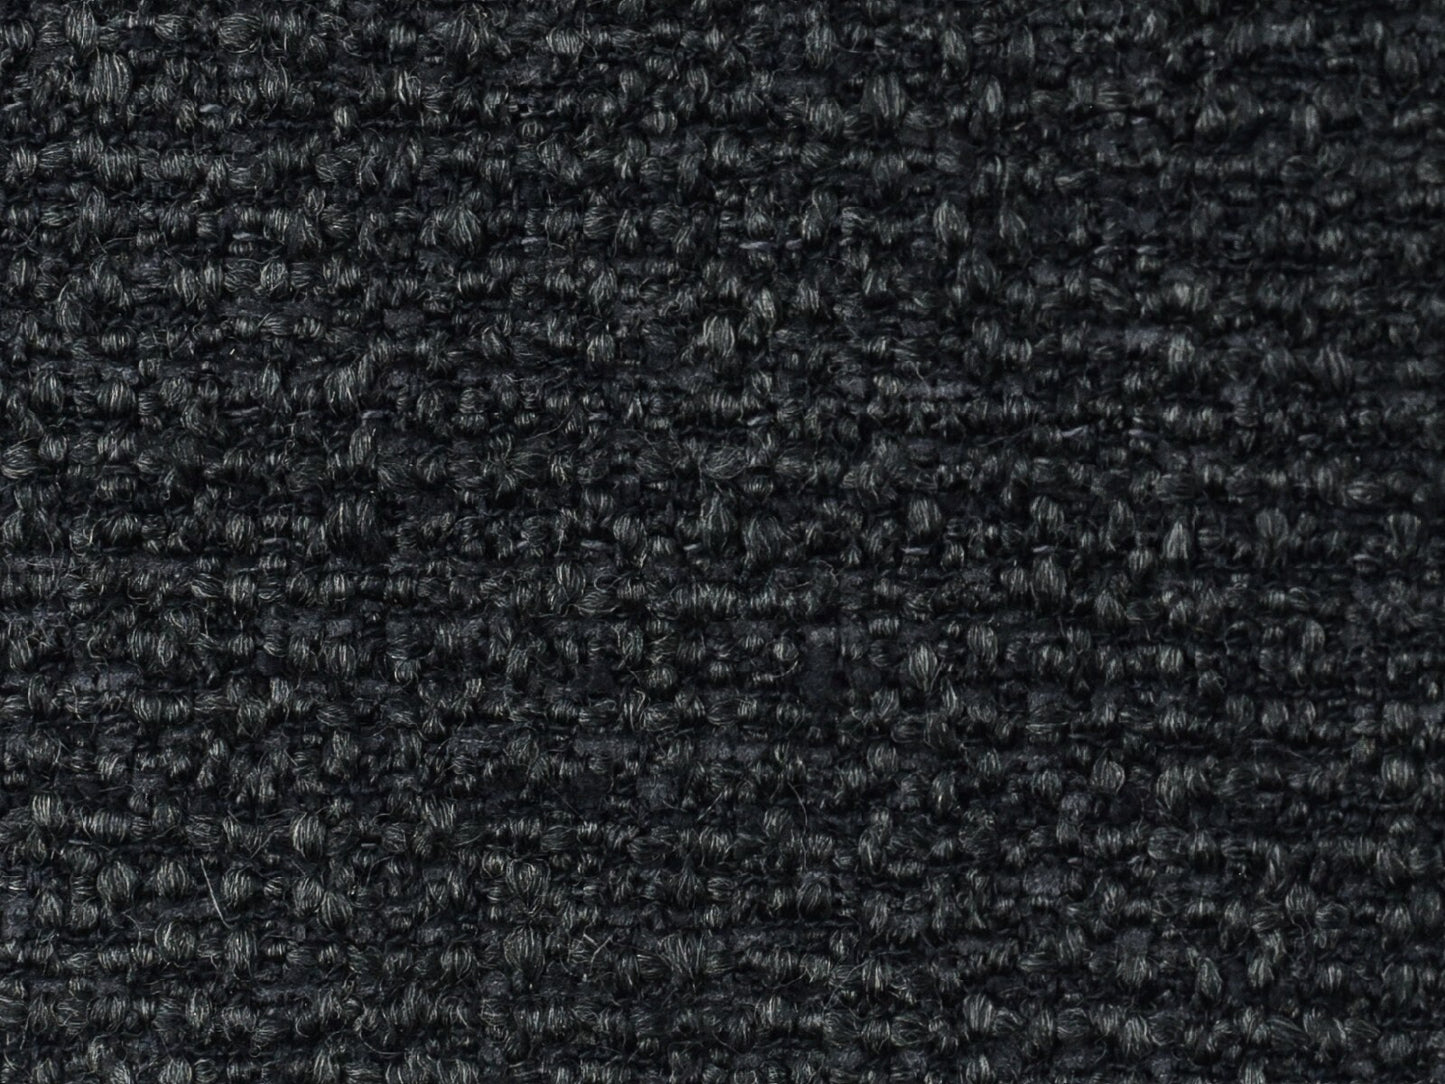 Contemporary Coarse Woven Textured Upholstery Fabric By The Yard 57"W/600GSM-Capability Pirate Black